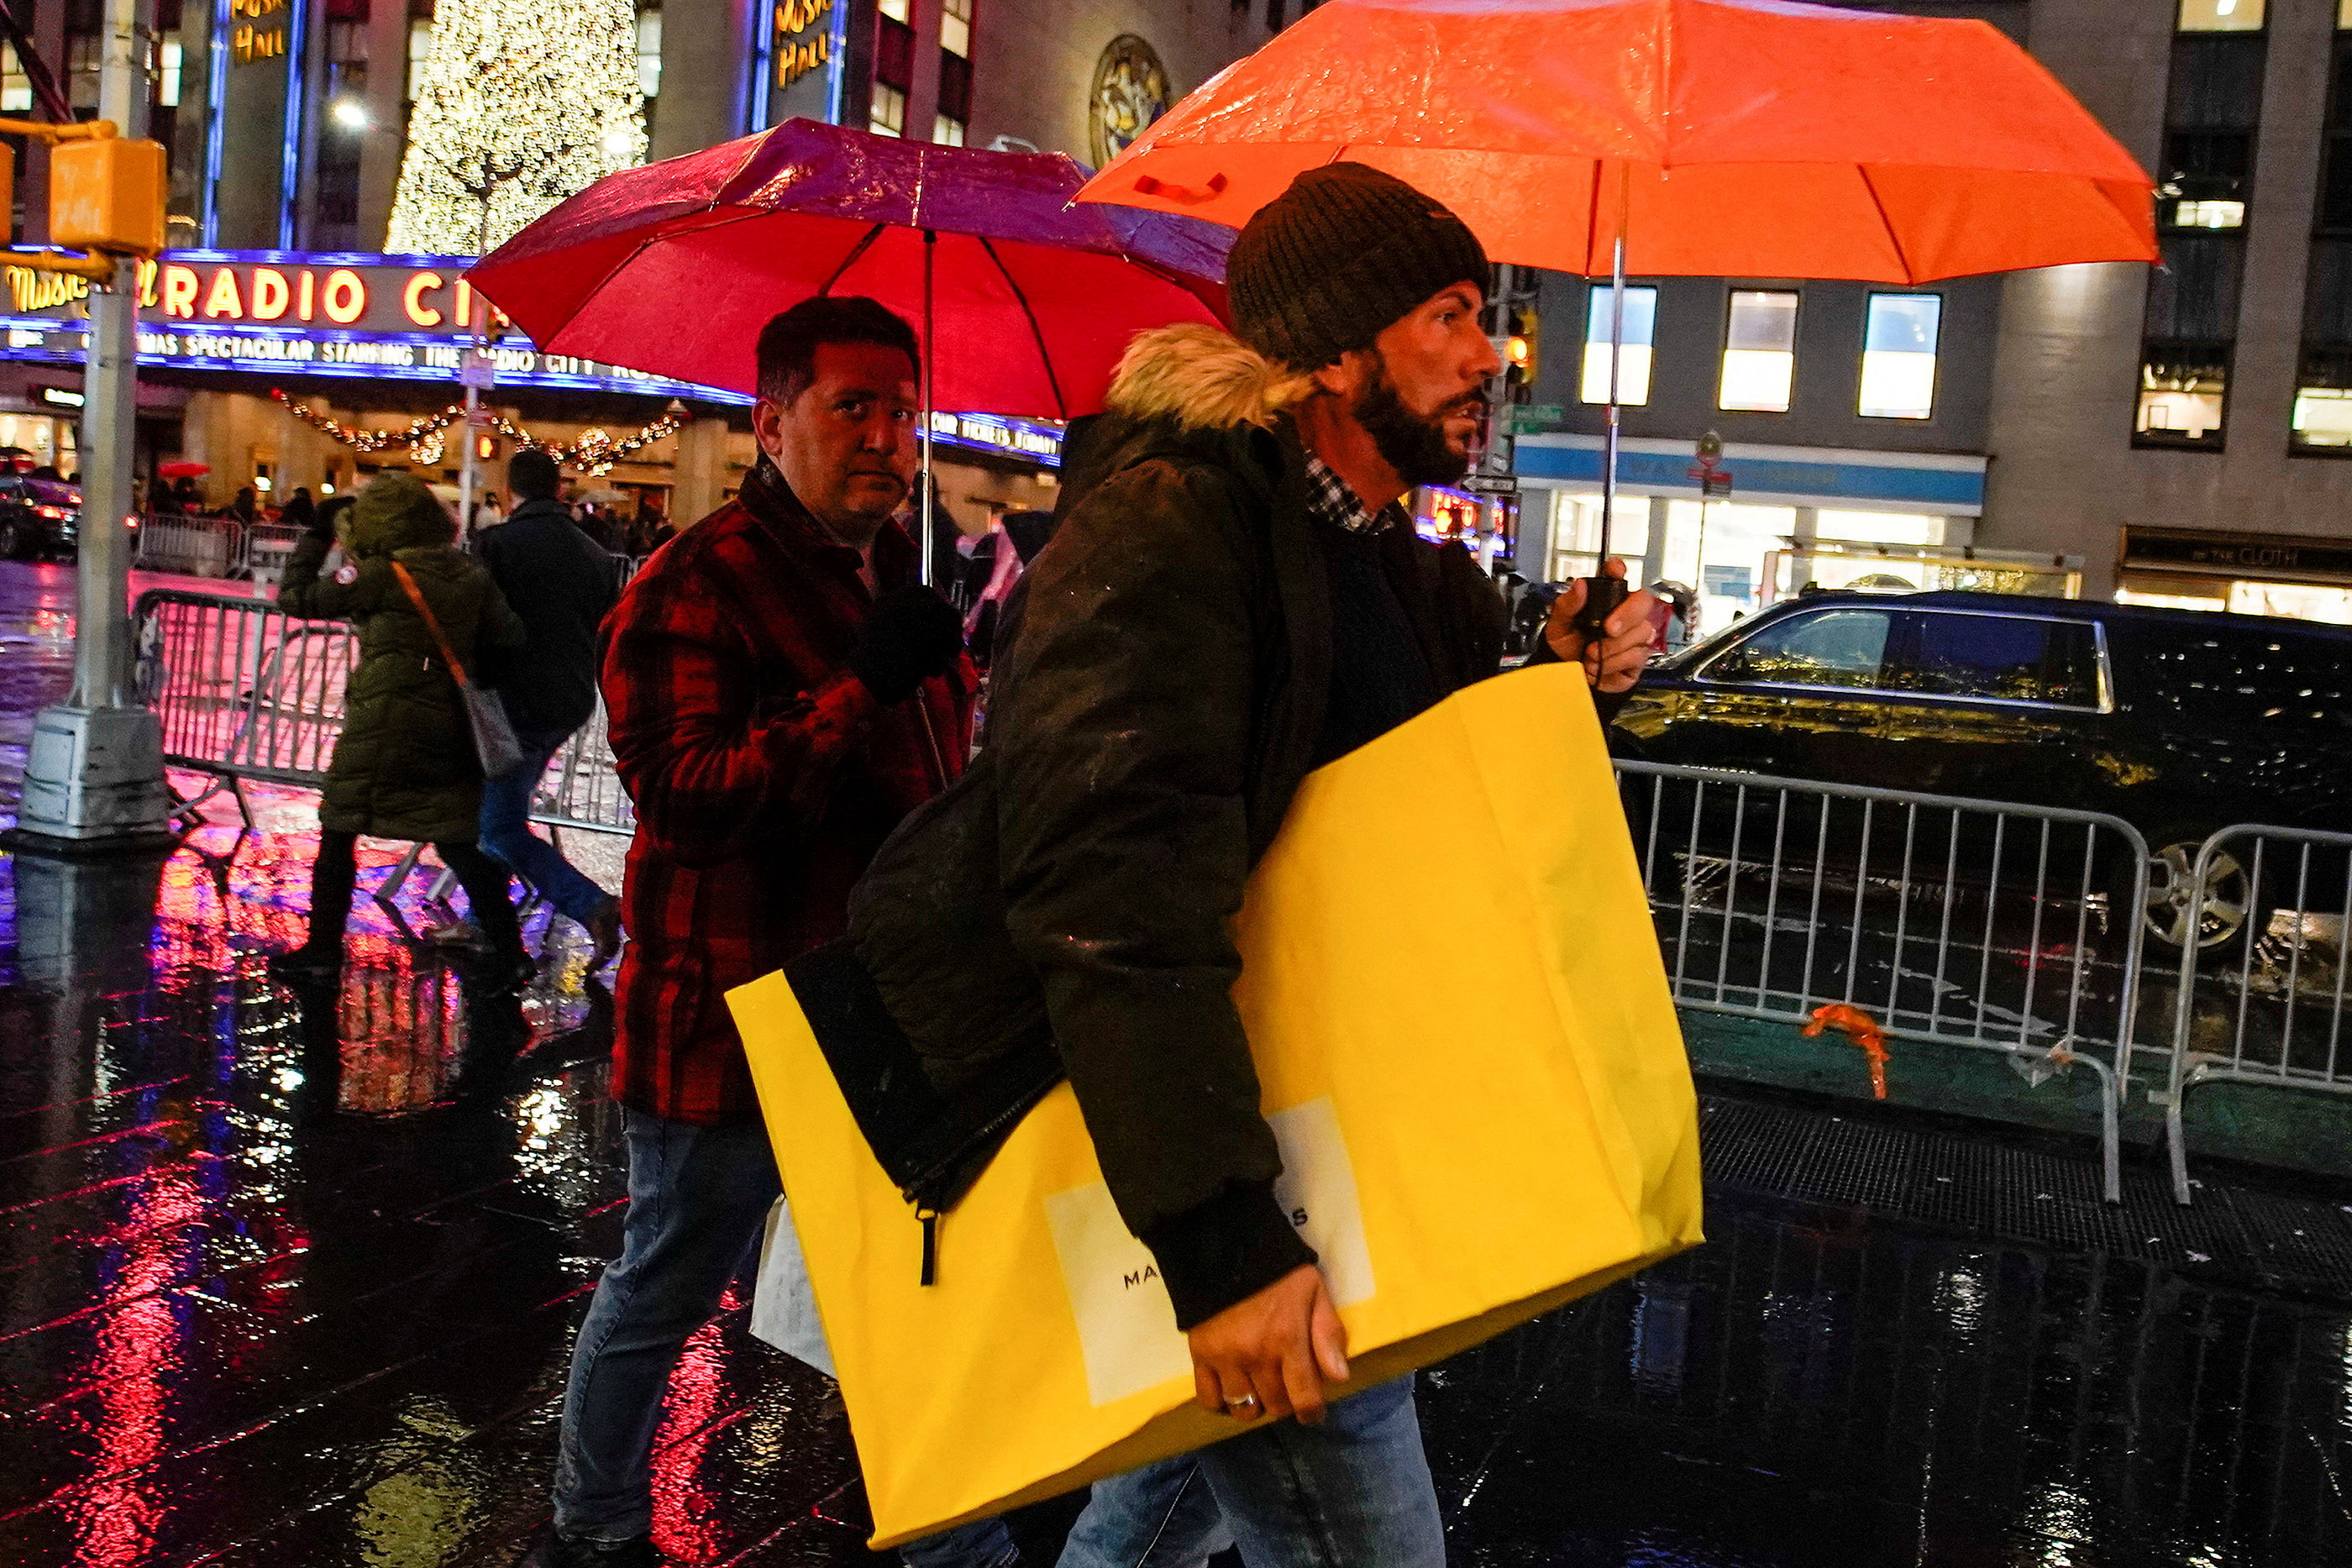 A man walks under the rain with his shopping bag during the holiday season in New York